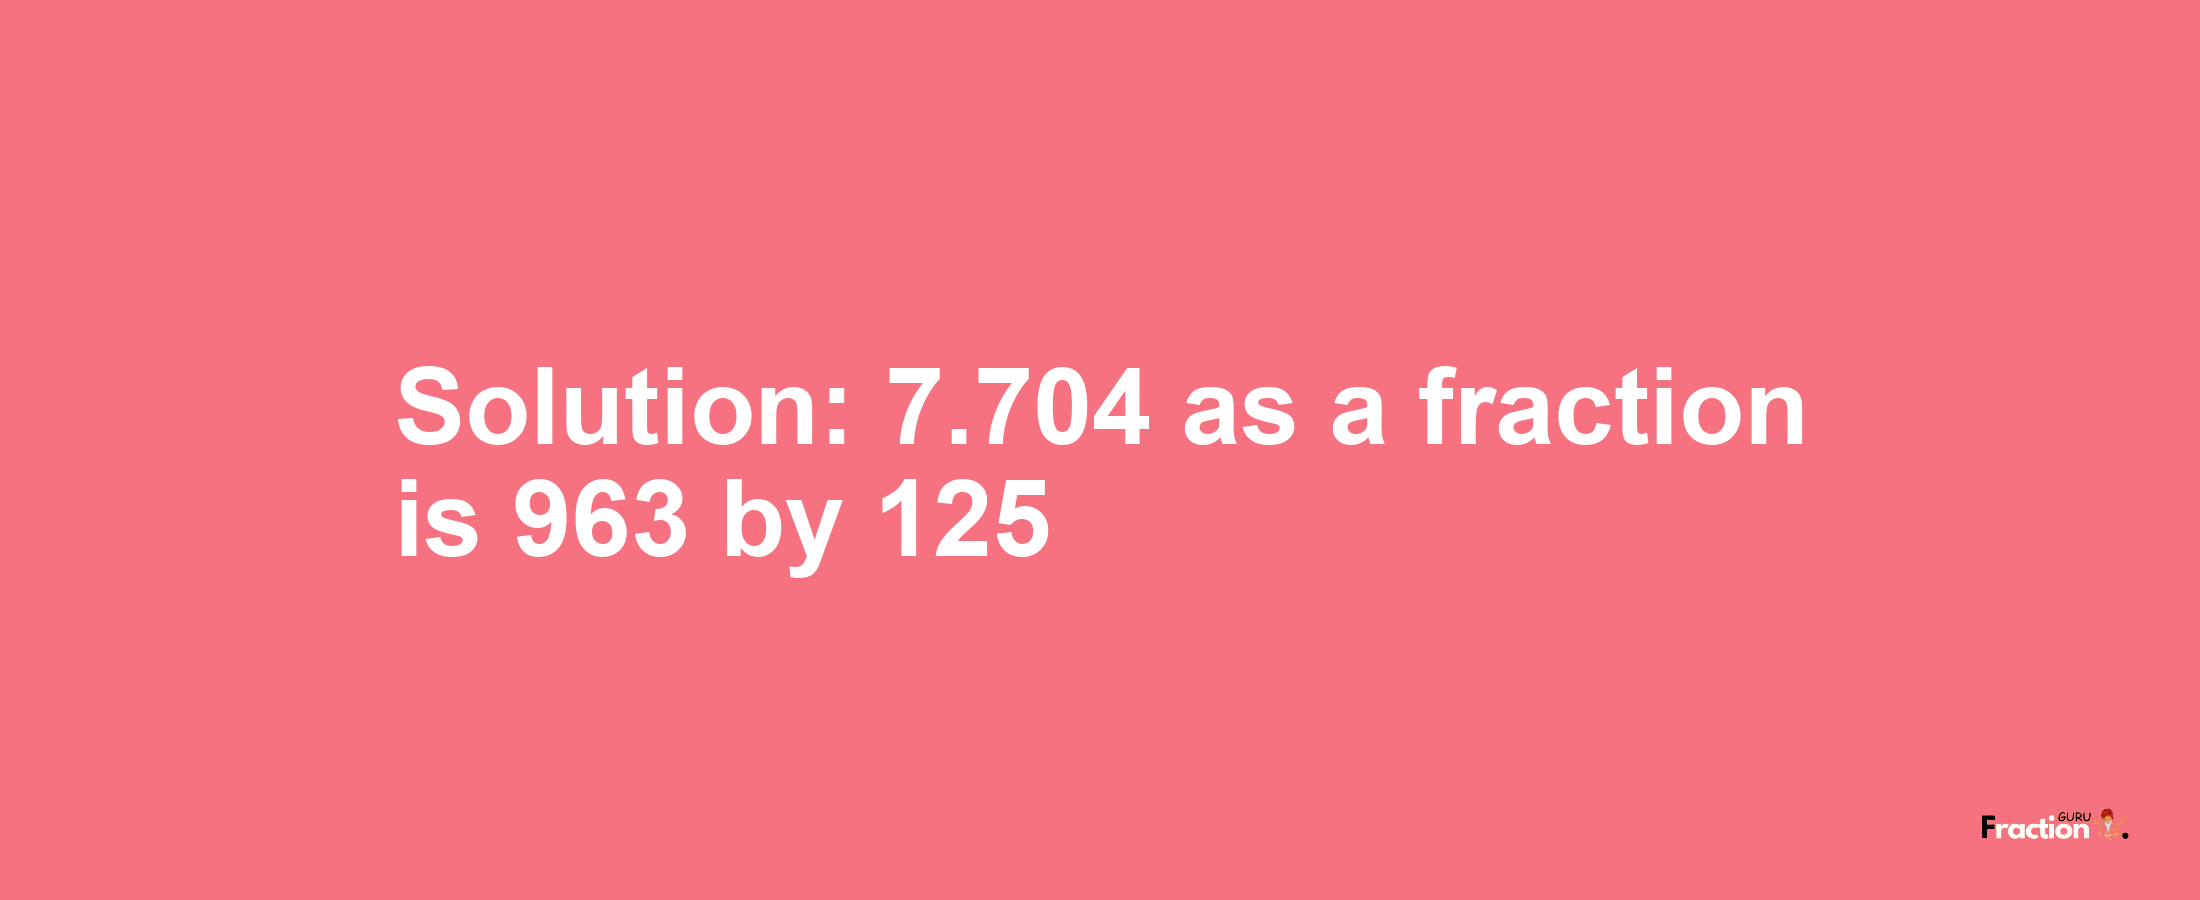 Solution:7.704 as a fraction is 963/125